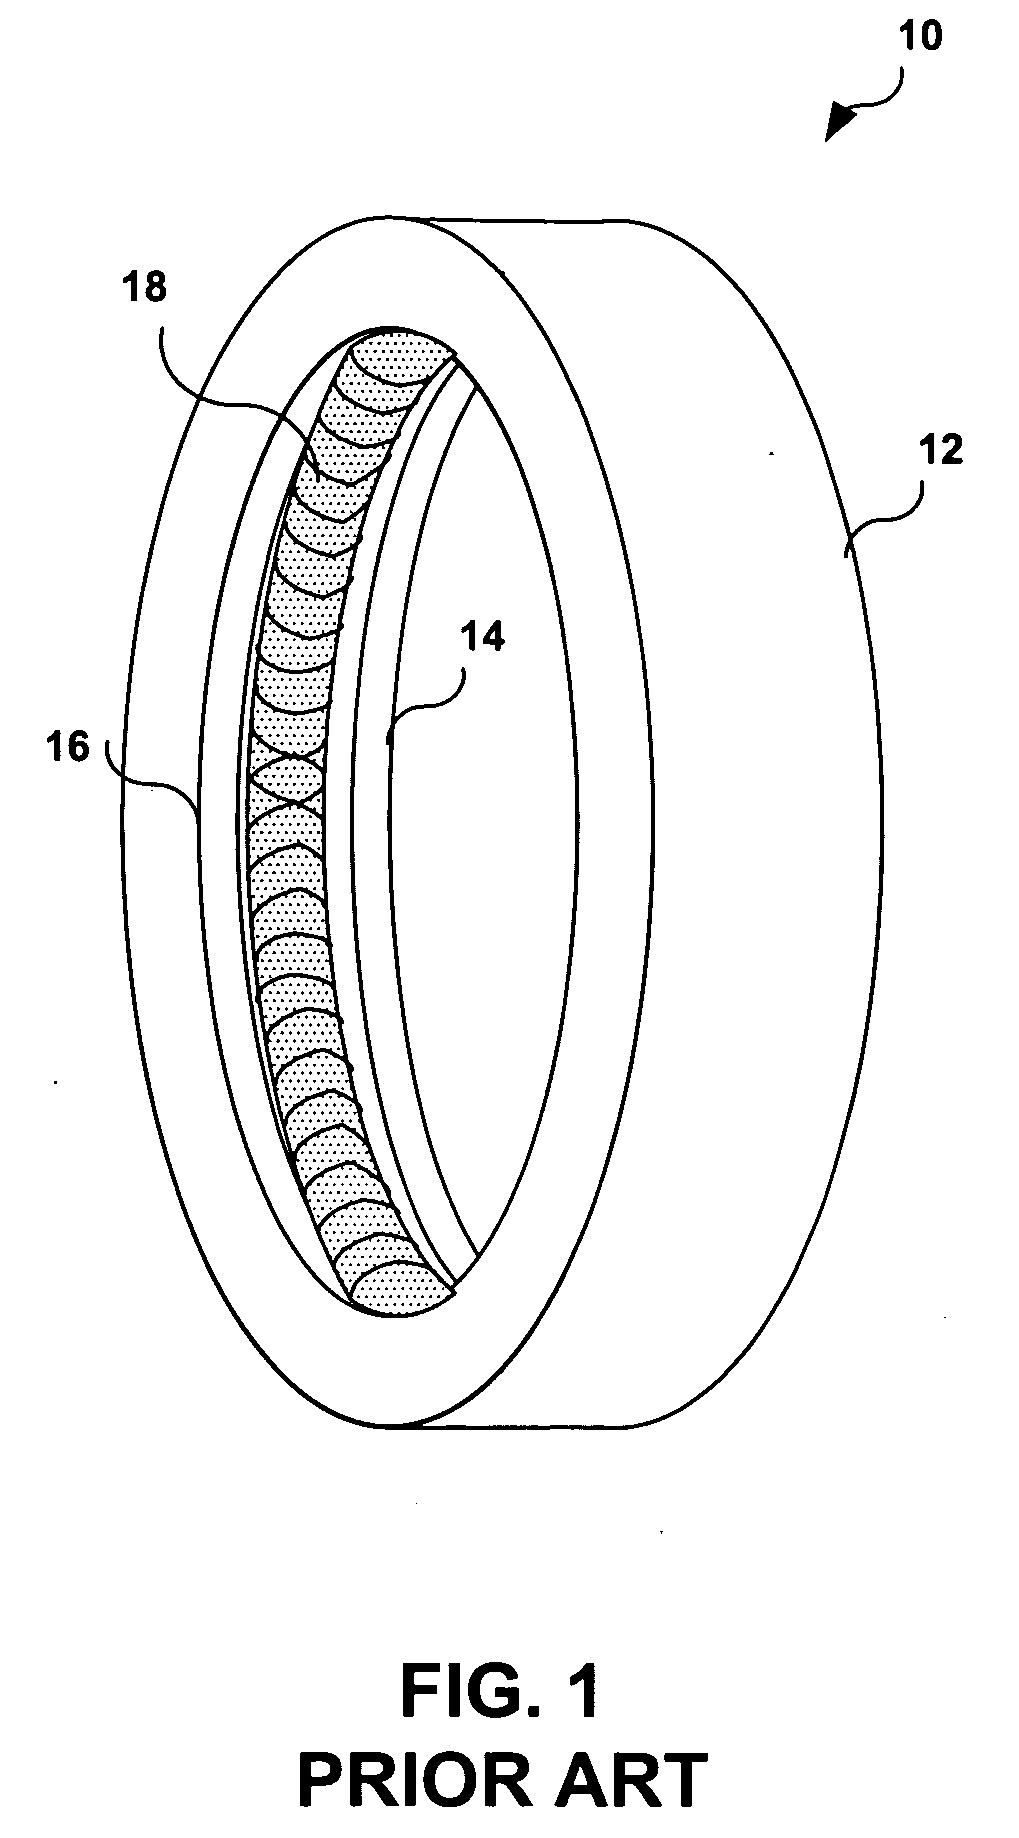 System and method of establishing an electrical connection between an implanted lead and an electrical contact